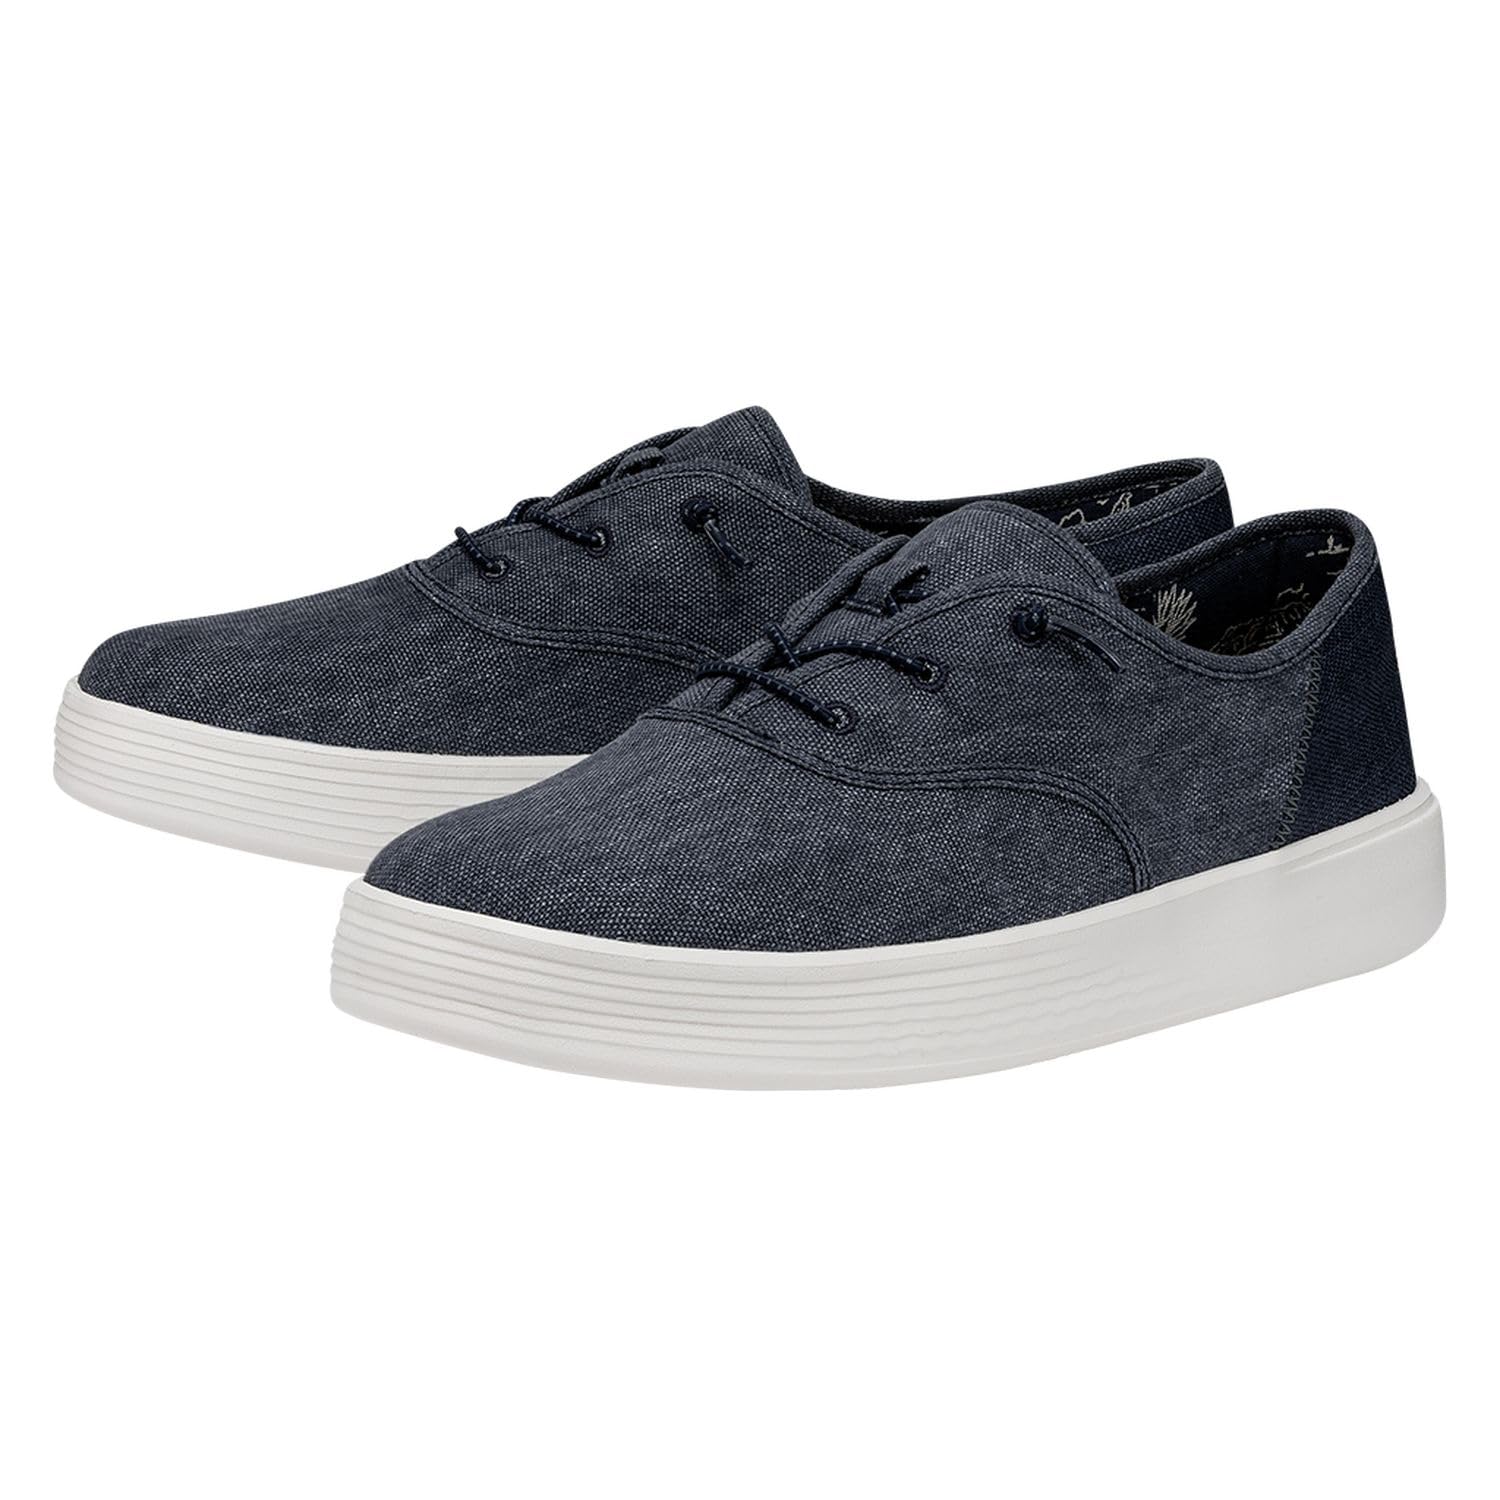 Hey Dude Conway Craft Linen Navy Size W10 | Women's Shoes | Women's Slip On Sneakers | Comfortable & Light-Weight